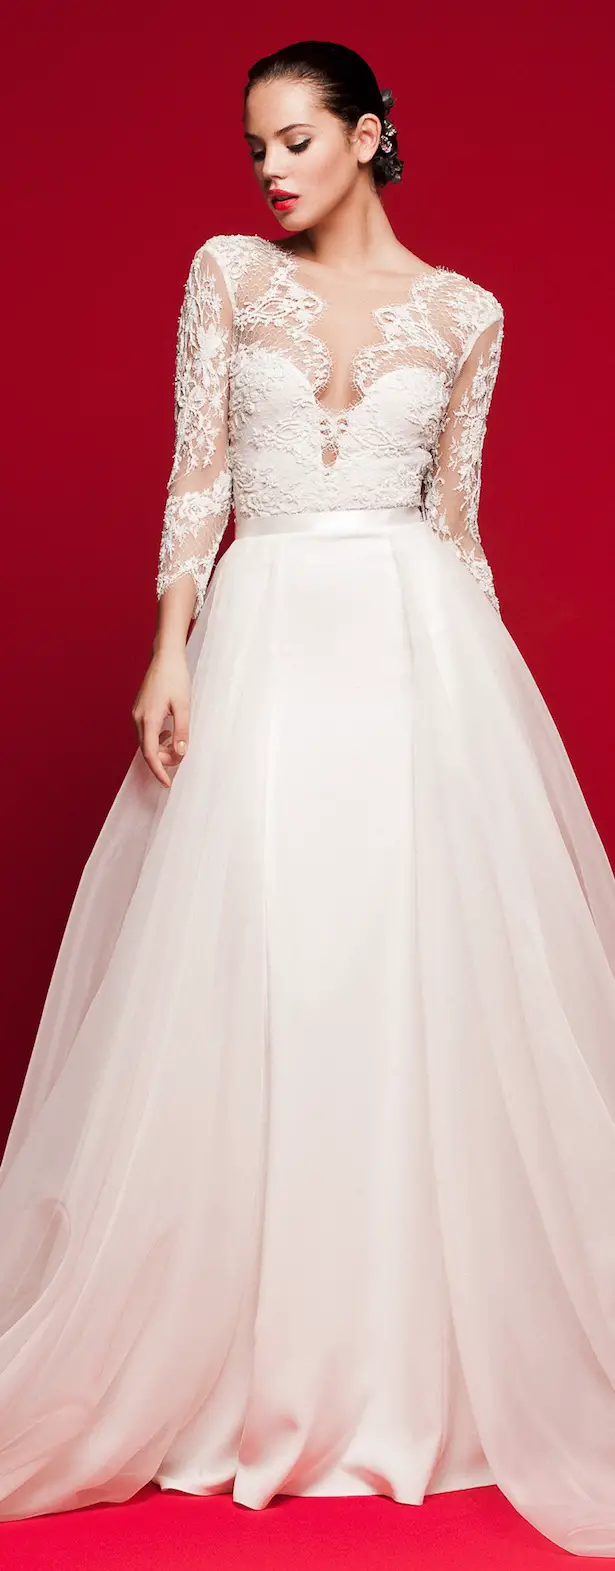 Long sleeve ball gown Wedding Dress with tulle skirt and lace top - Daalarna 2018 Love Story Bridal Collection